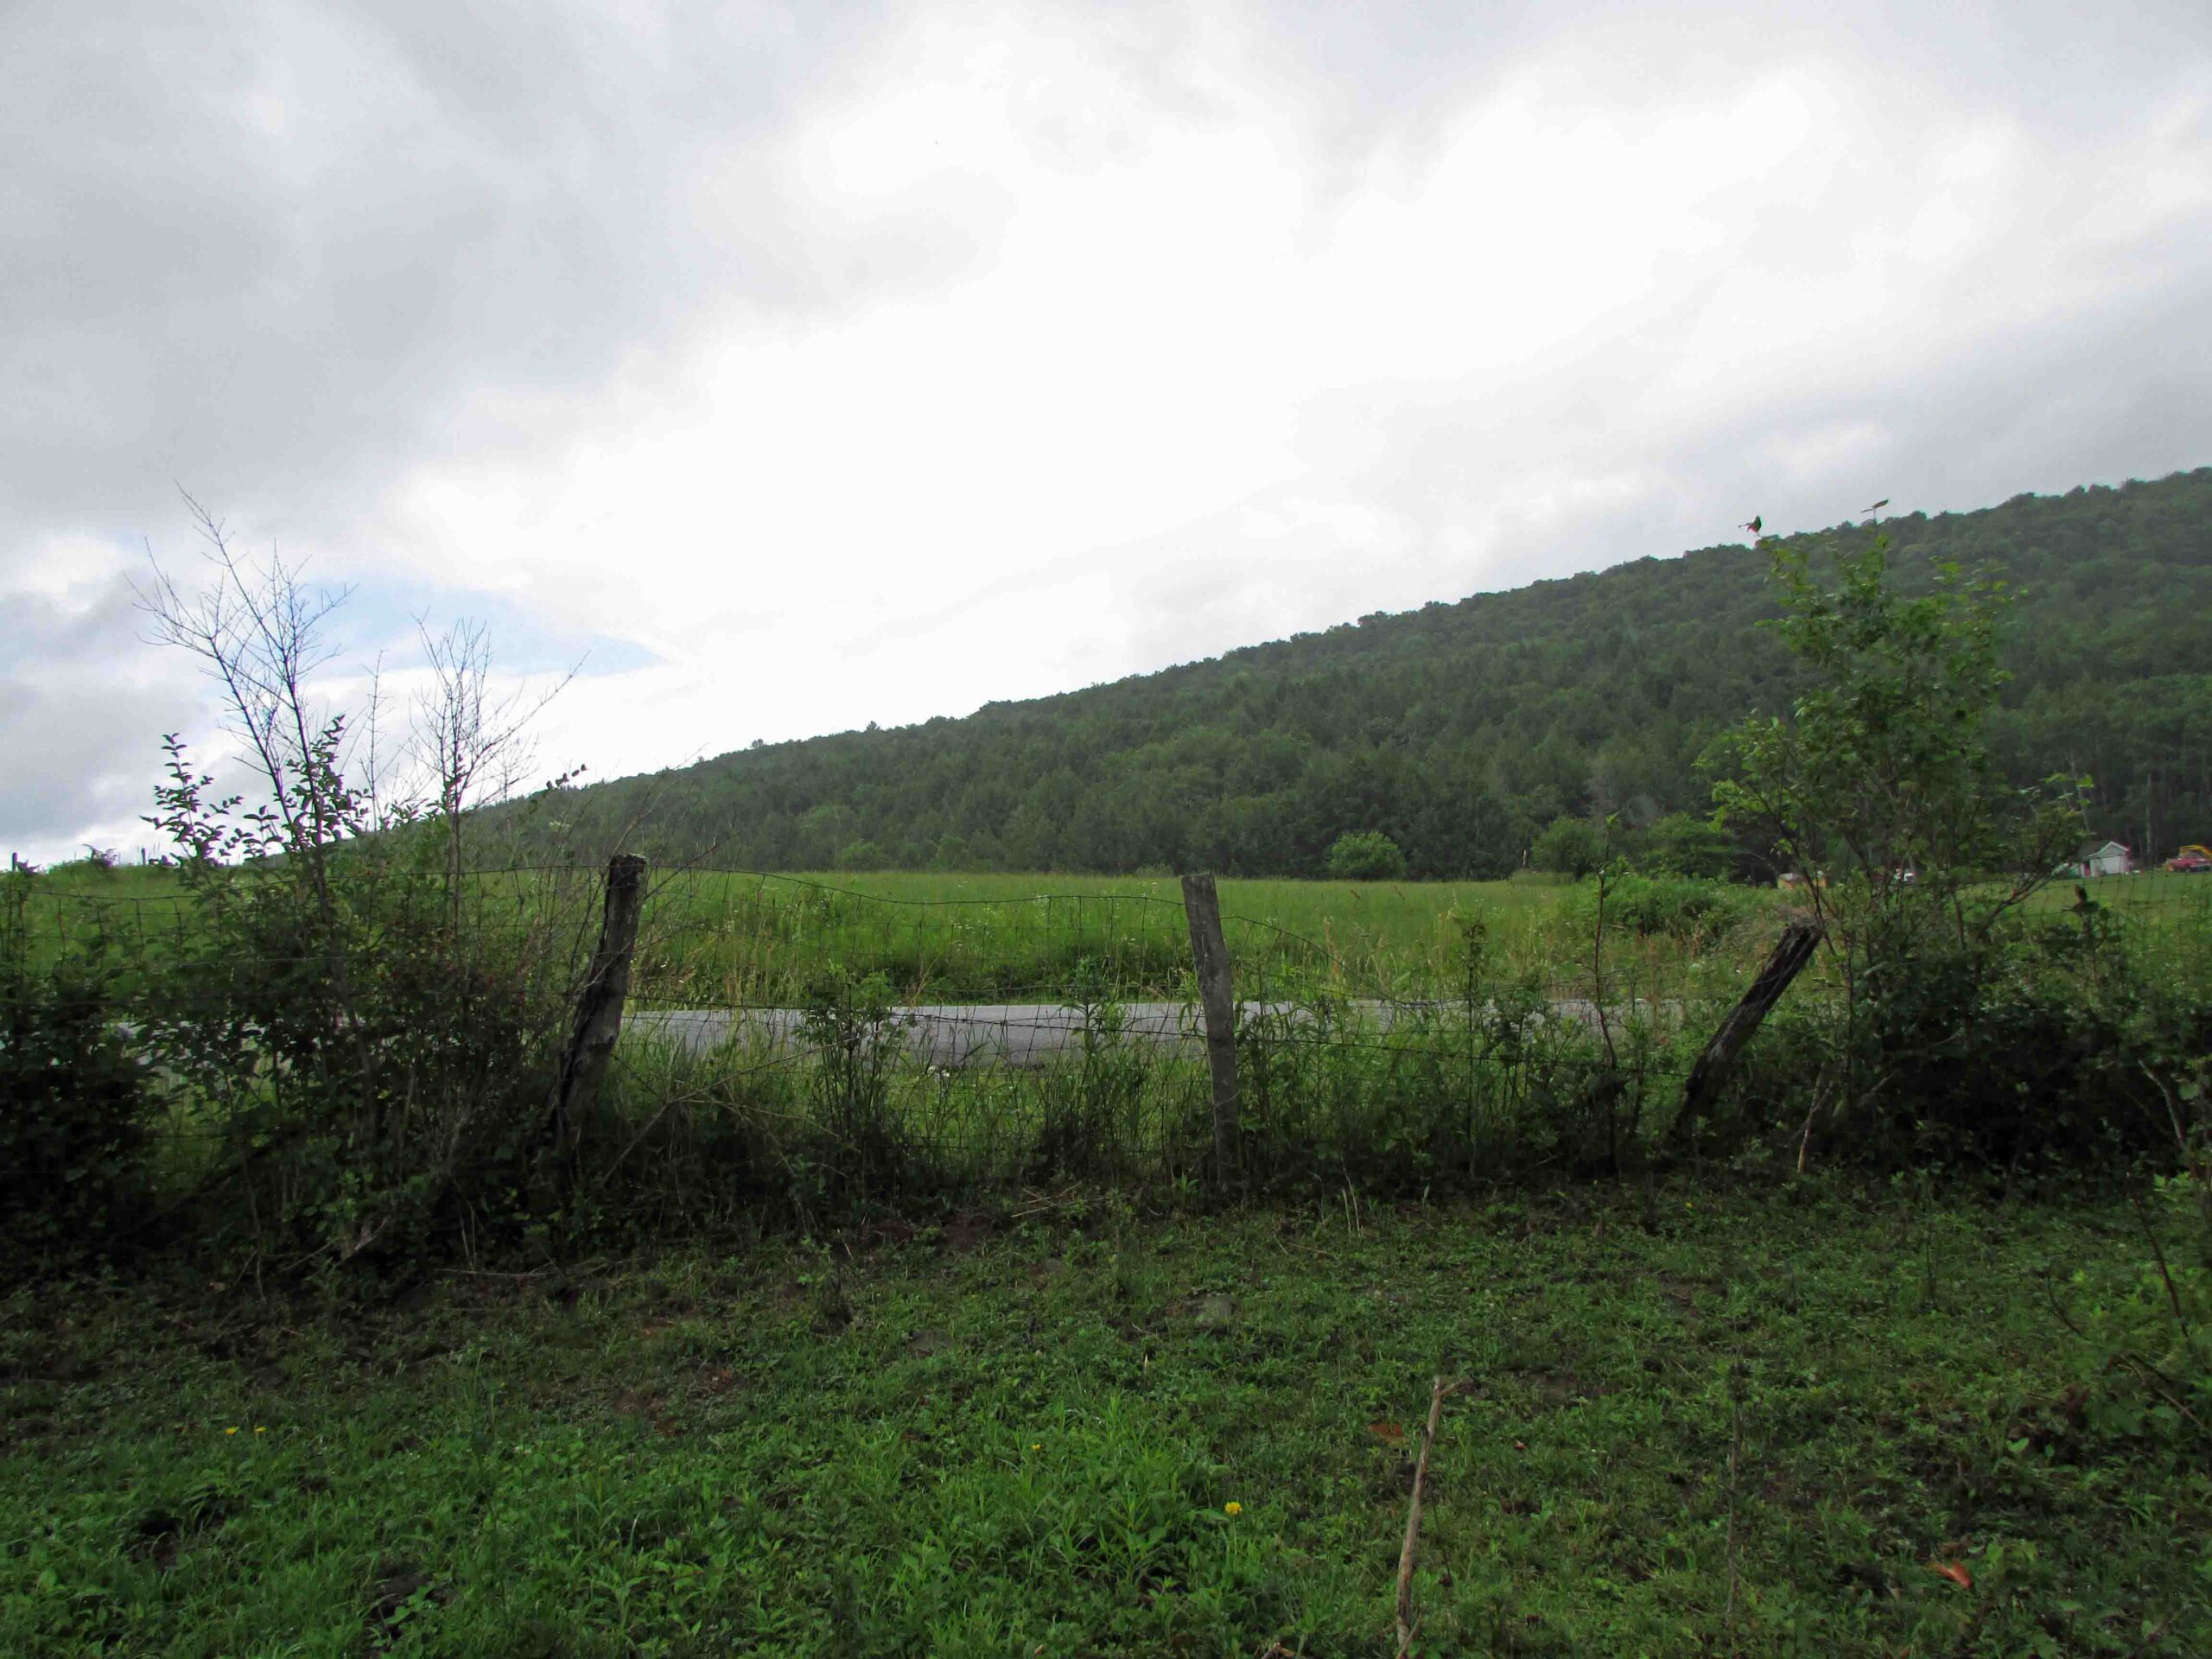 “SHADY FLATS” 2.42 Country Acres – Level – Woods & fields – Mt views – Good road – Fence – Electric – No zoning restrictions – Only $15,900!